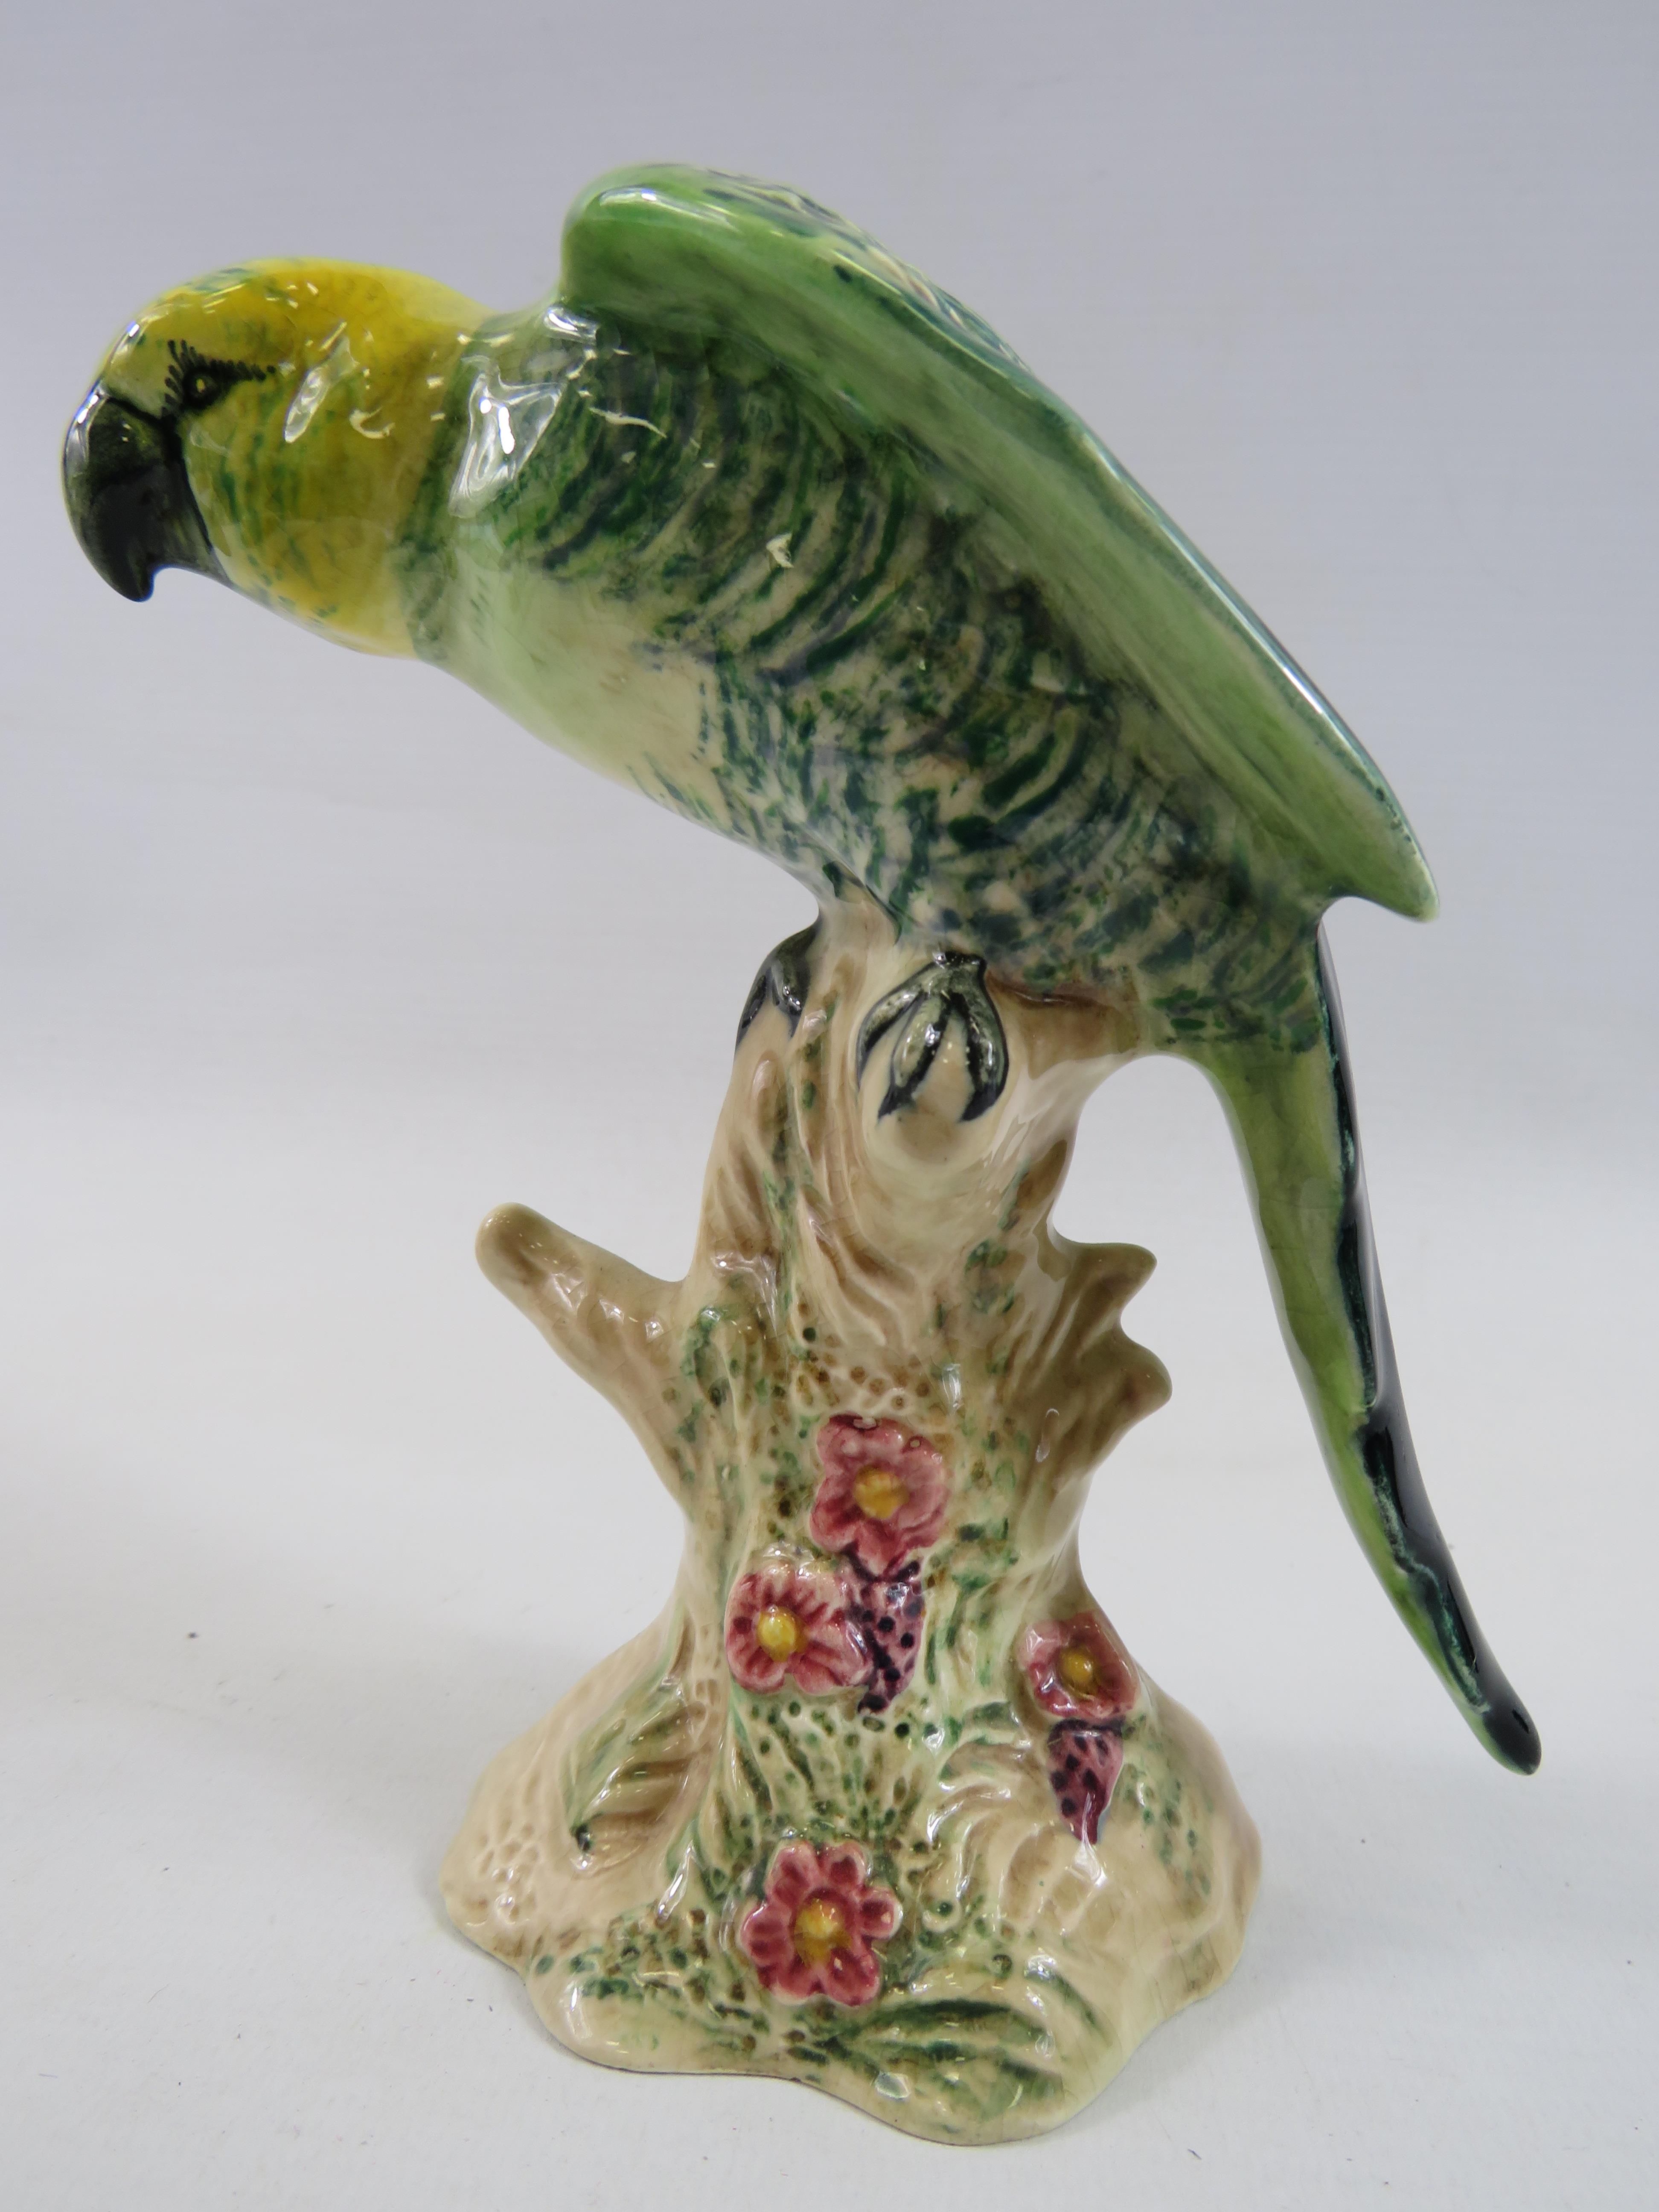 Beswick green parrot figurine, model no 930. approx 6" tall. - Image 2 of 5